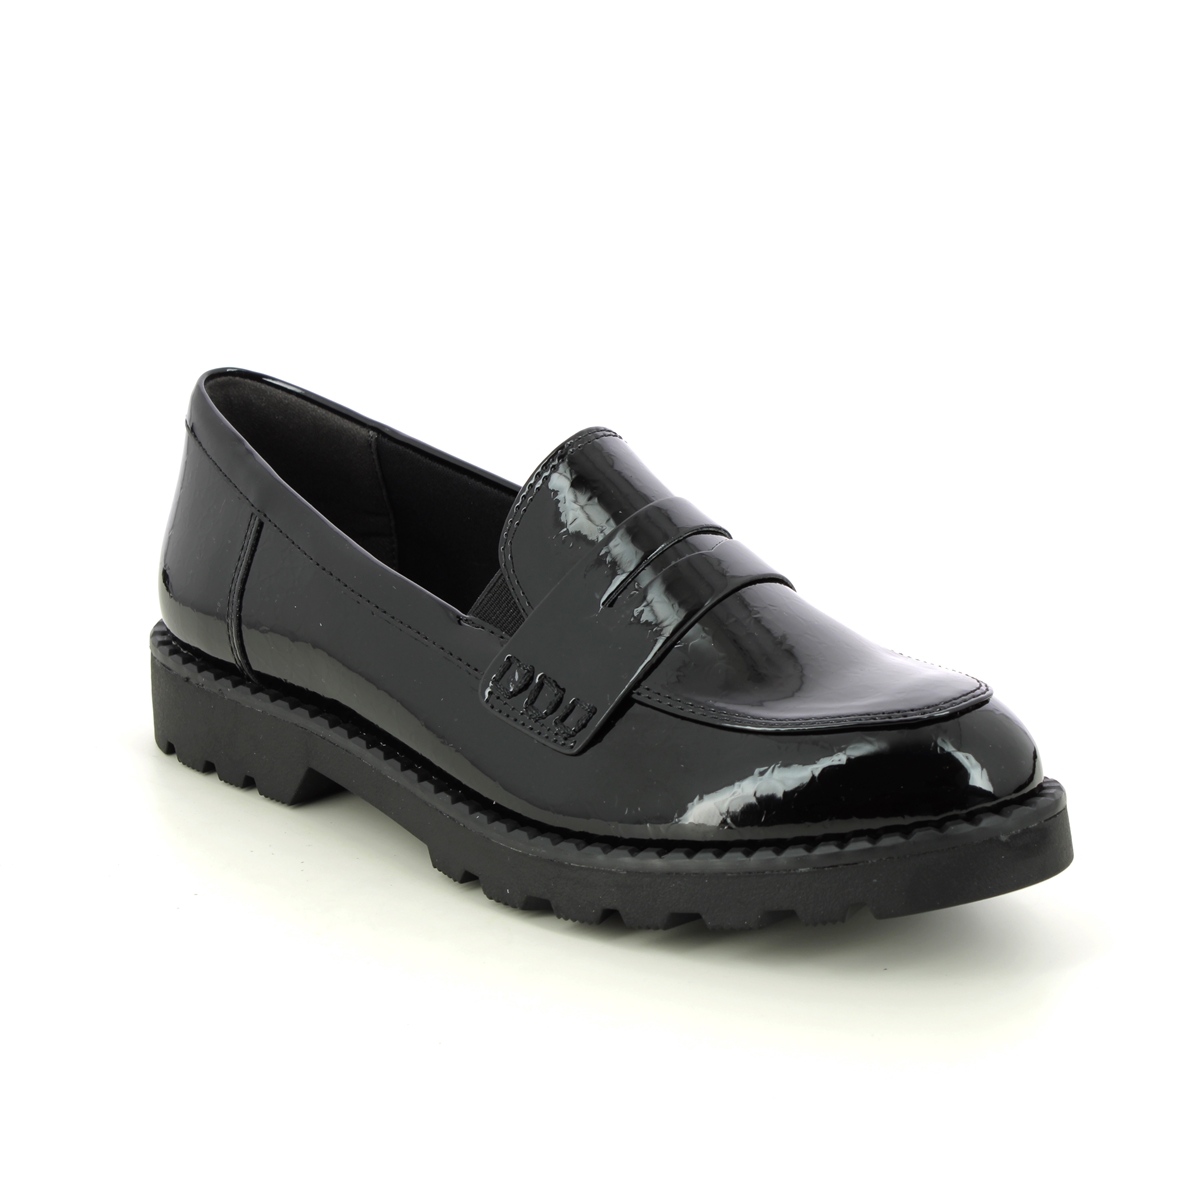 Tamaris Crissy 25 Black Patent Womens Loafers 24312-29-063 In Size 40 In Plain Black Patent